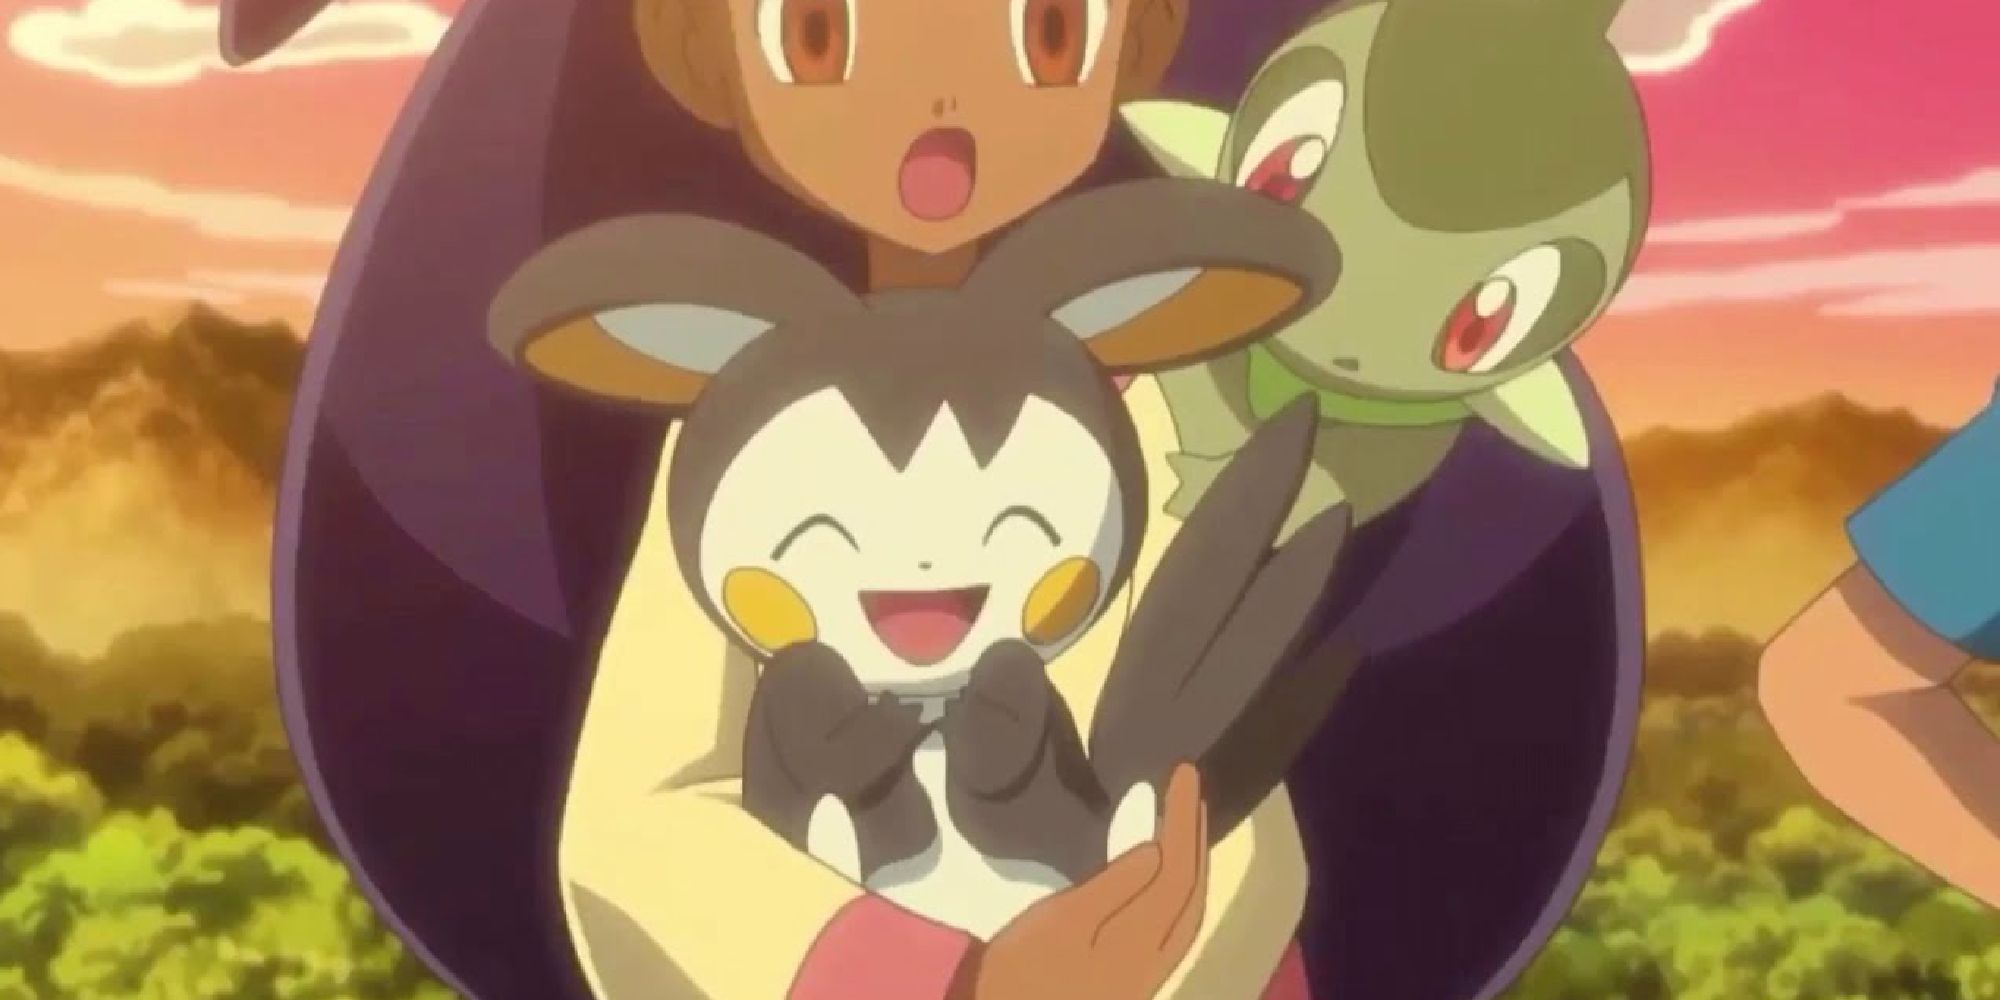 Iris holding Emolga at sunset with Axew on her shoulder